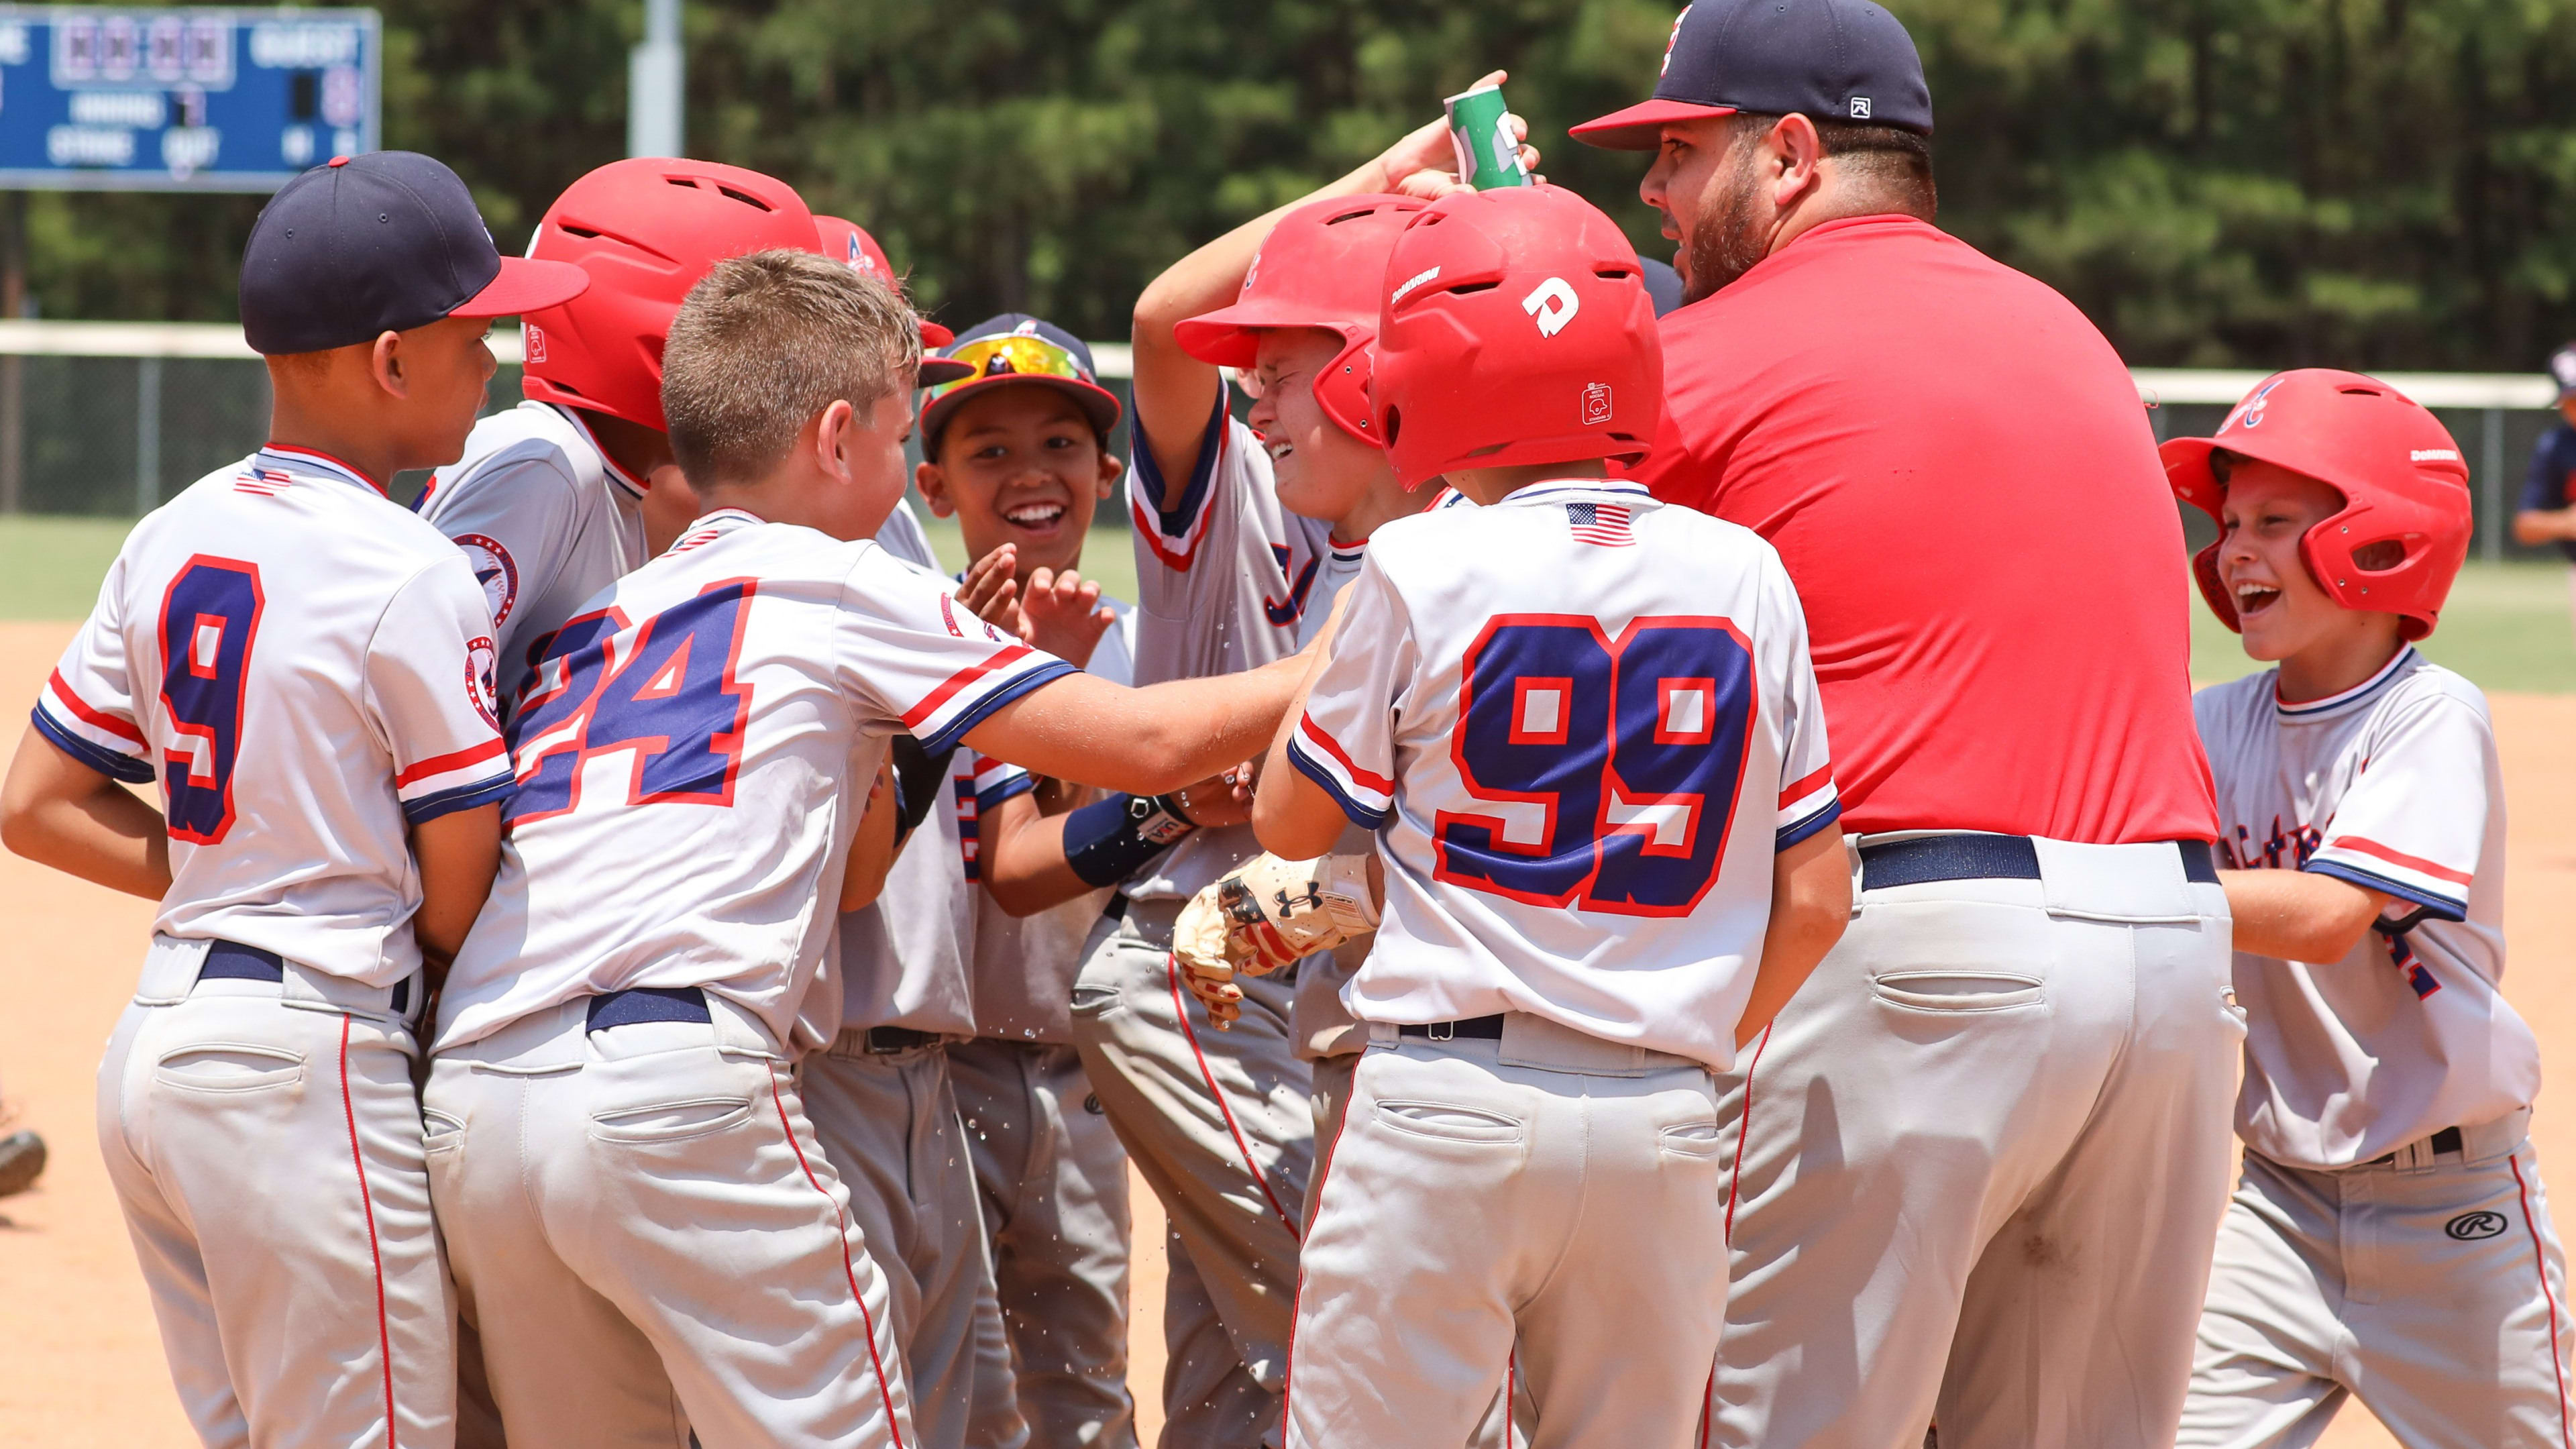 Chinese Taipei dominates in combined LLWS perfect game